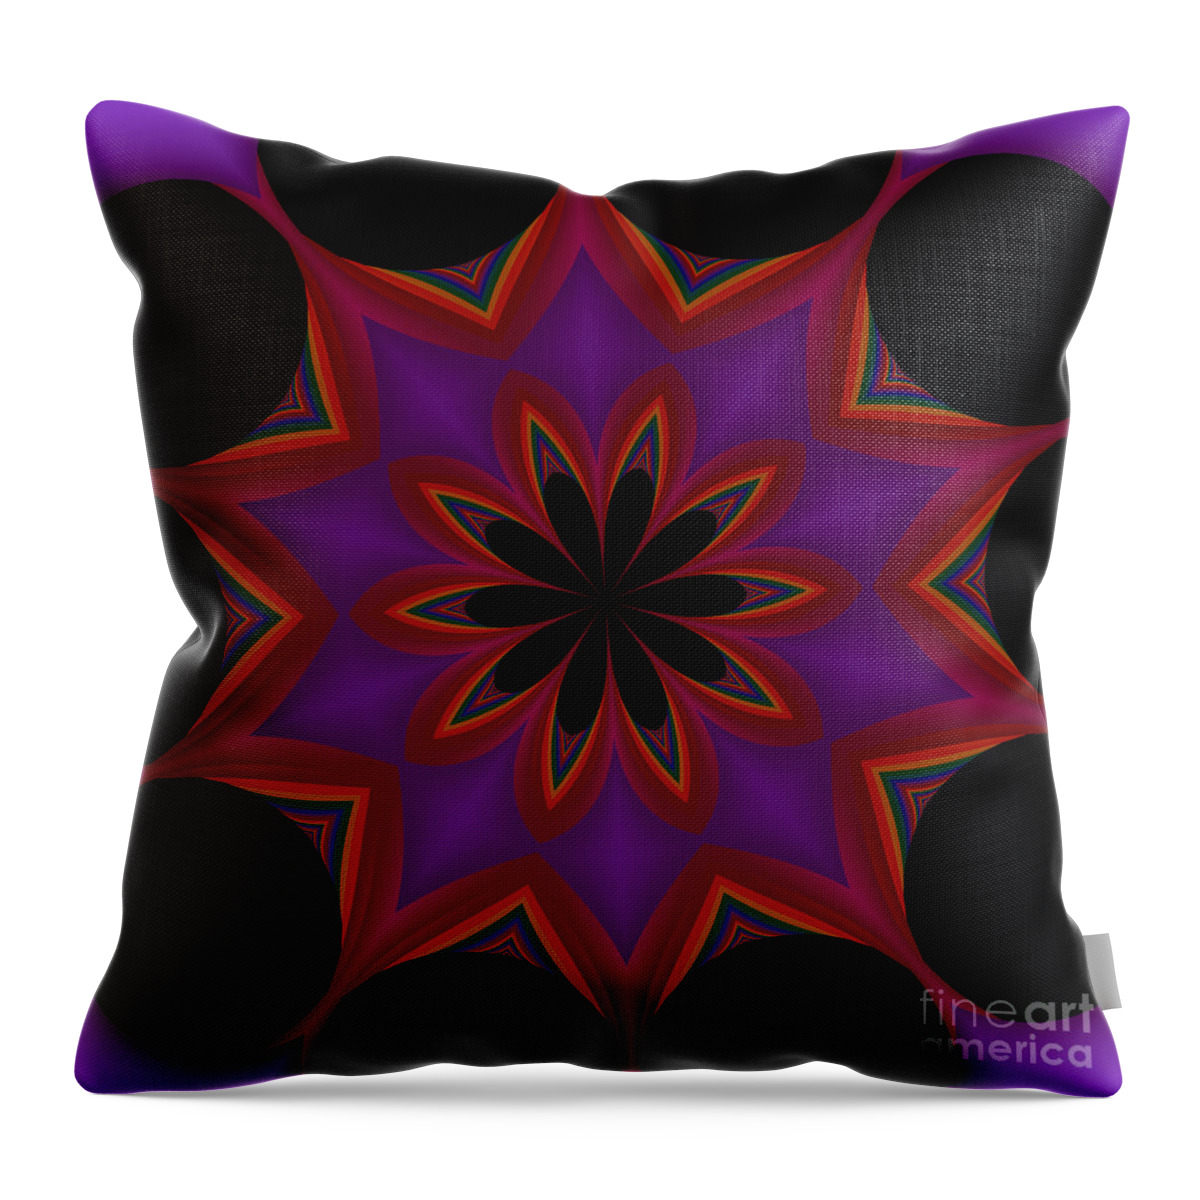 Fractals Throw Pillow featuring the digital art Fractalscope Flower 6 in Purple Violet Orange and Black by Rose Santuci-Sofranko